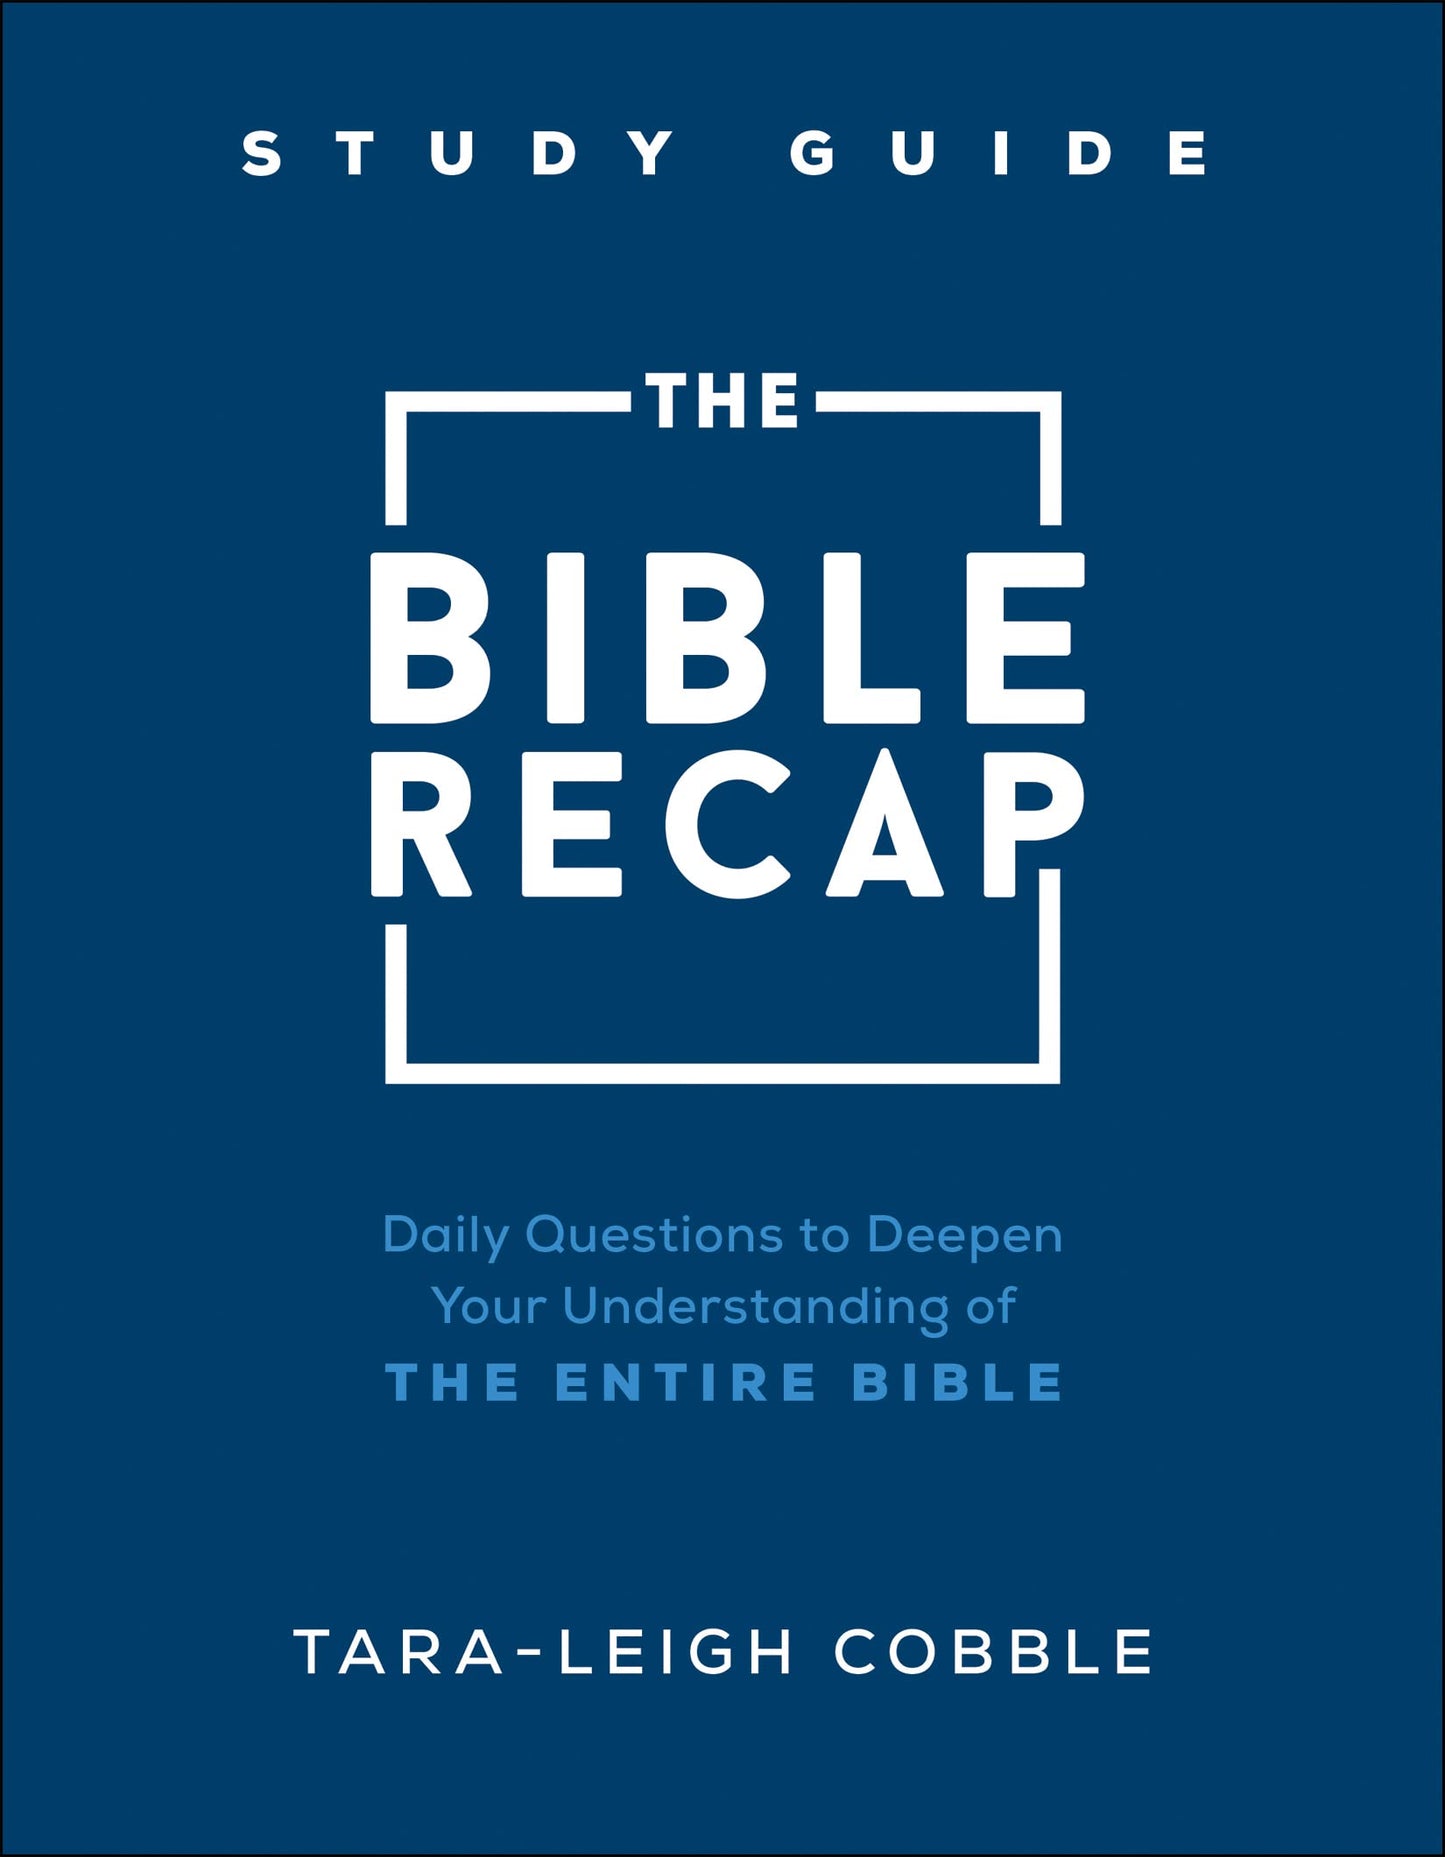 The Bible Recap Study Guide: Daily Questions to Deepen Your Understanding of the Entire Bible